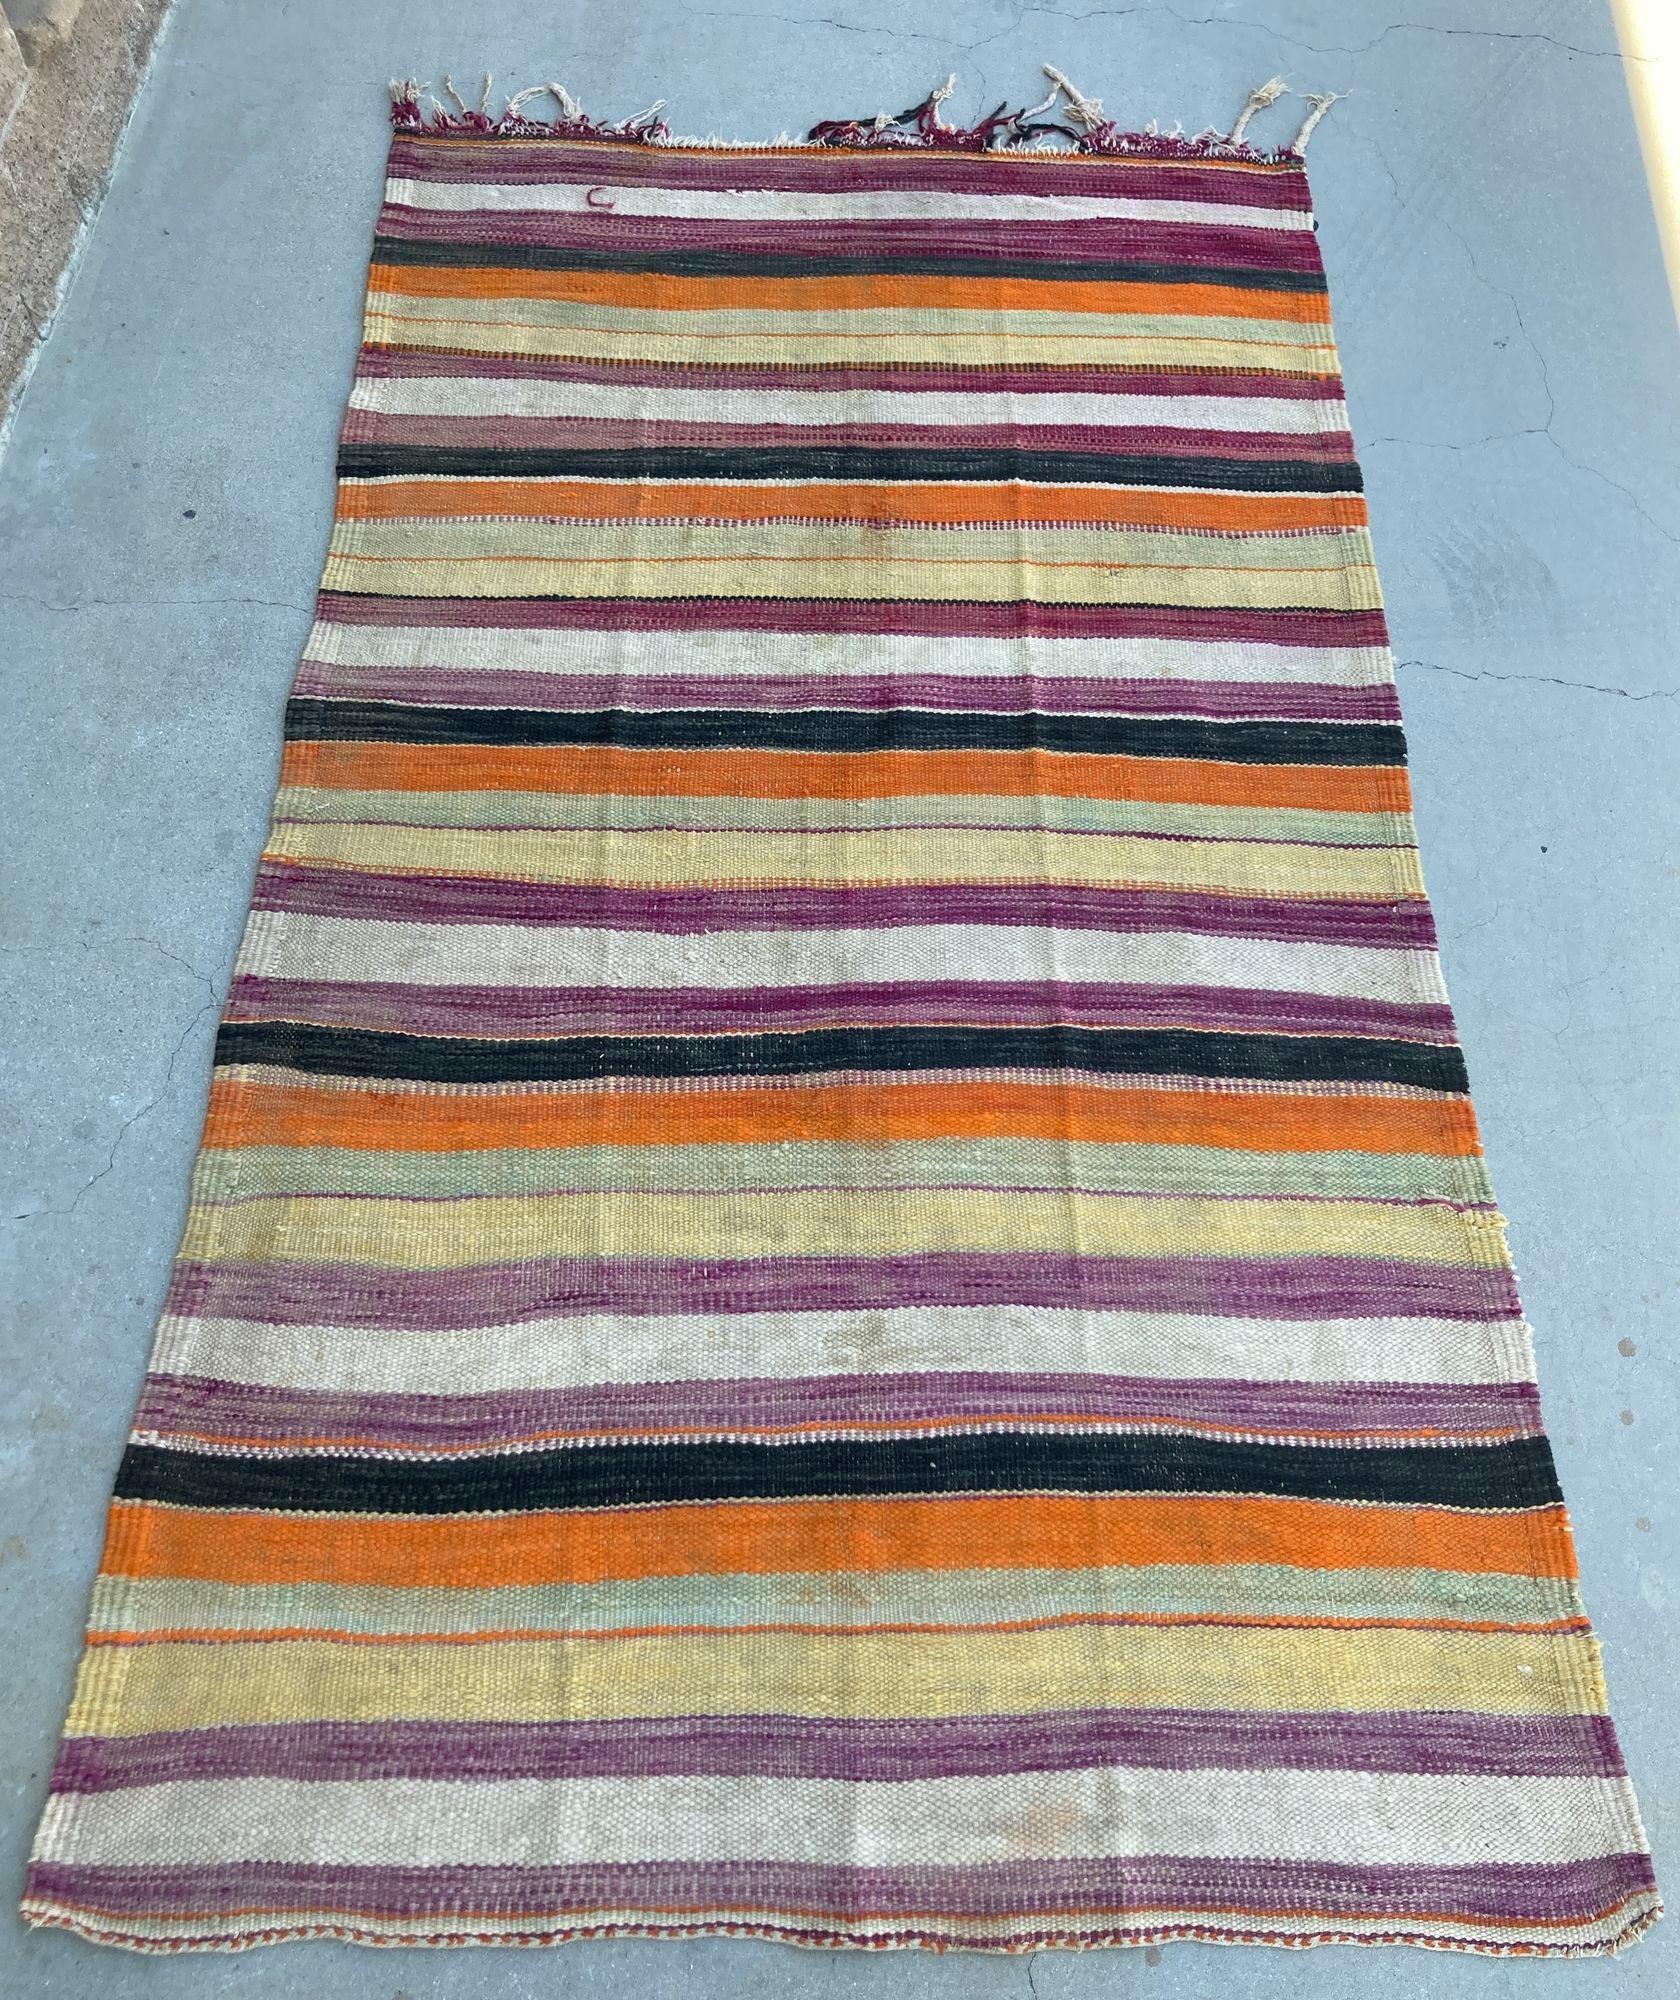 1960s Moroccan Tribal Rug, Hand woven North African Ethnic Textile Floor Covering.Vintage Moroccan flat-weave stripe Kilim rug. Hand crafted large size vintage Moroccan rug, handwoven by Berber women in Morocco for their own use. This ethnic rug was